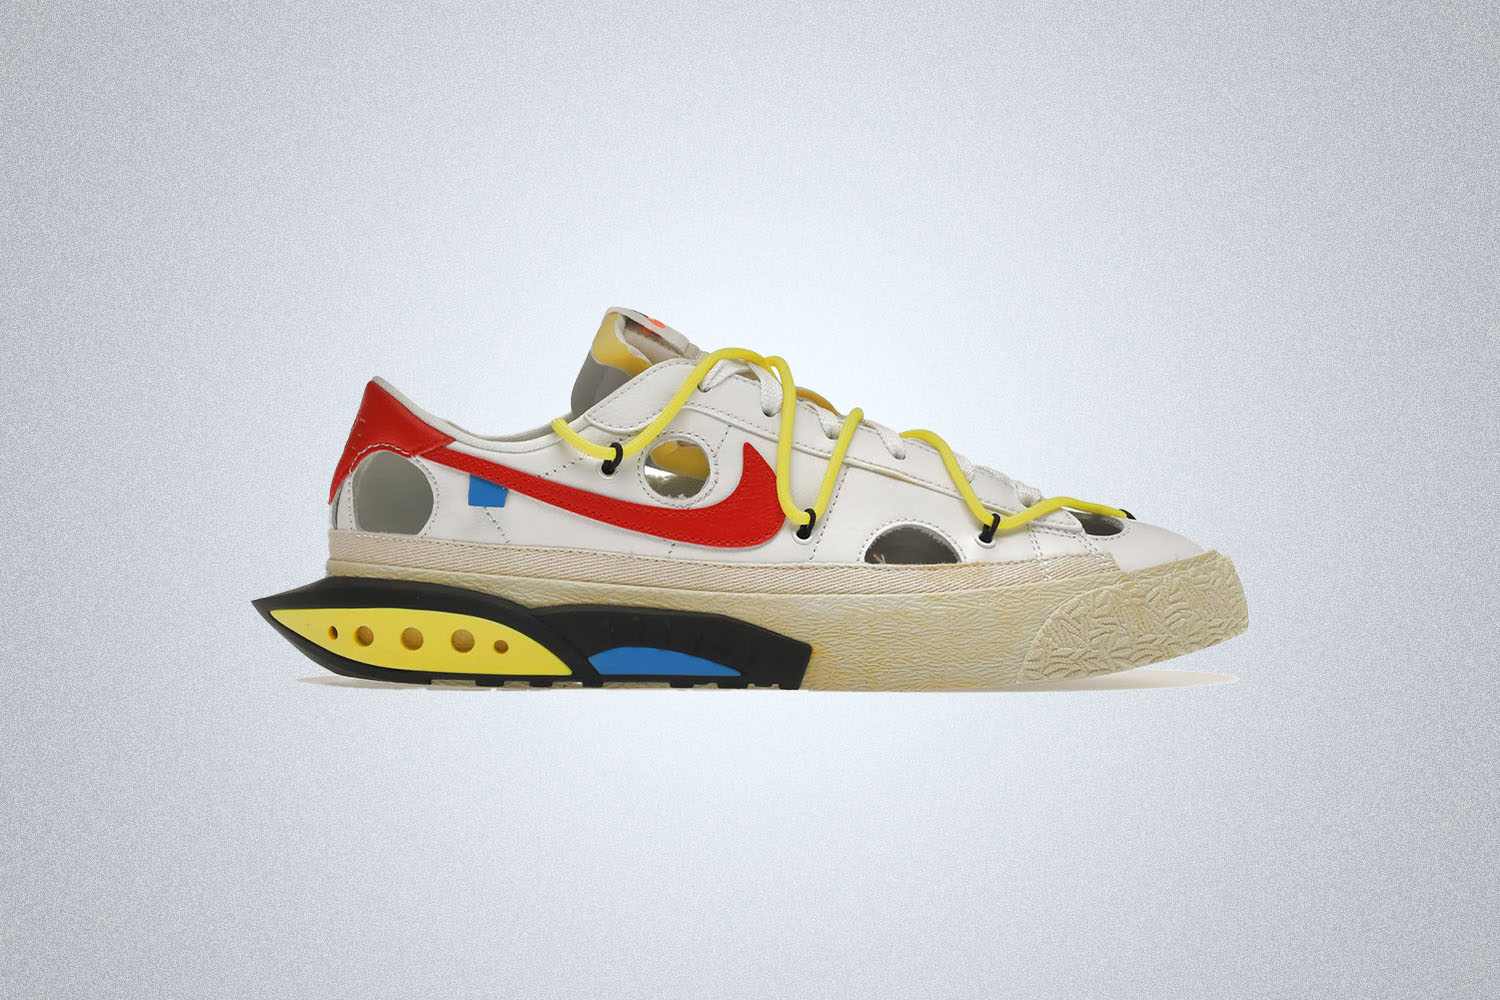 A Nike x Off White Sneaker with "" branding and holes cut out of the frame on a grey background